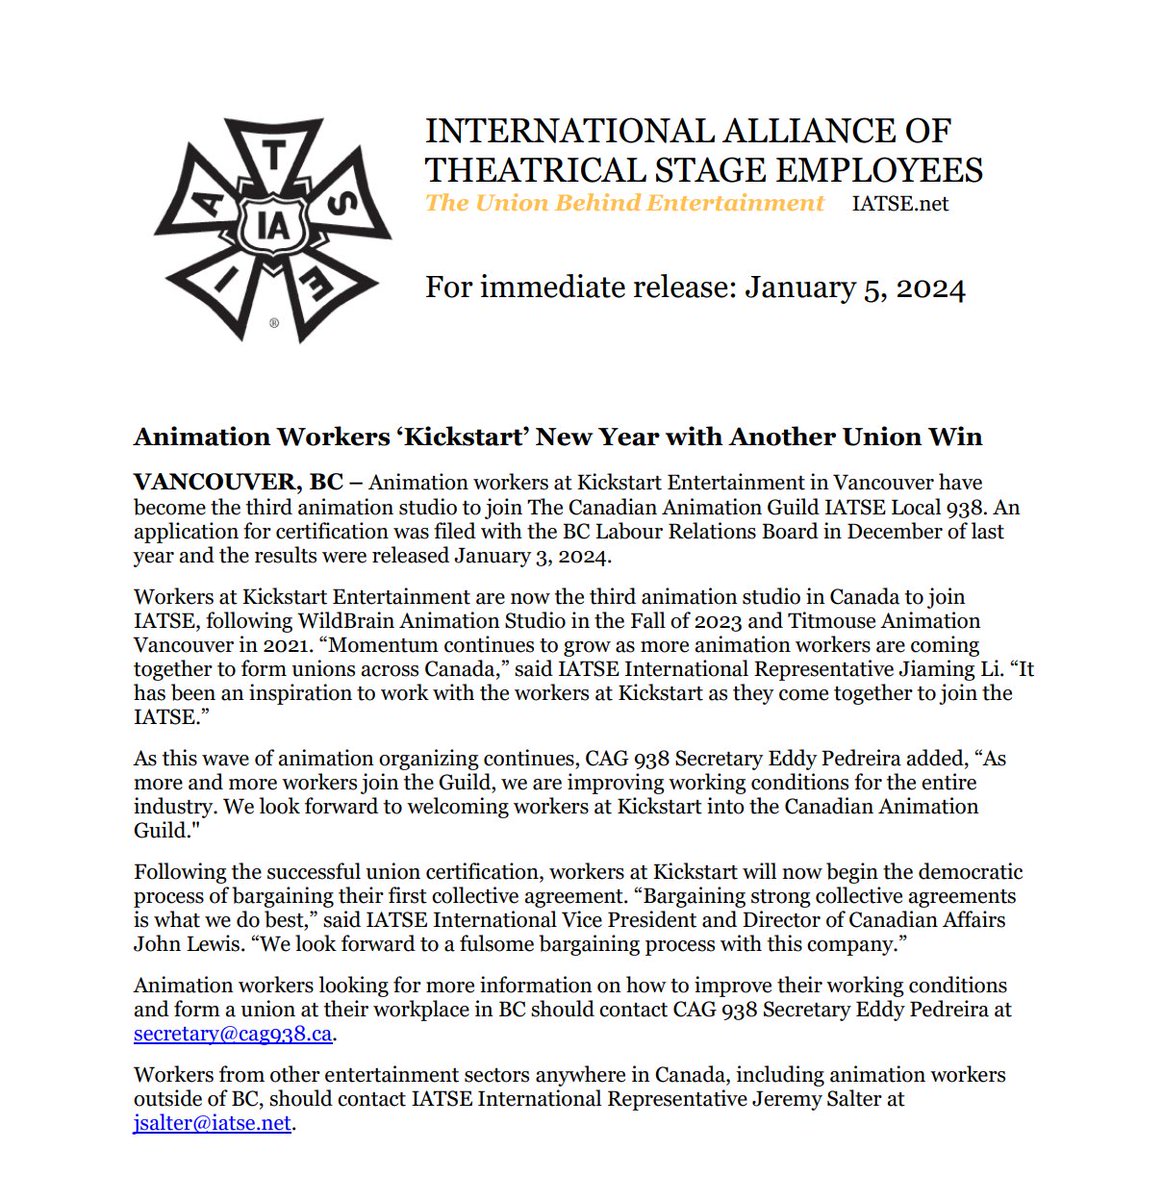 Animation workers at Kickstart Entertainment in Vancouver have become the third #animation studio to join IATSE @CAG938. Congratulations and welcome to the @IATSE family!! #WeDrewAUnion #union #UnionStrong #solidarity Press release avail here: shorturl.at/klxAY